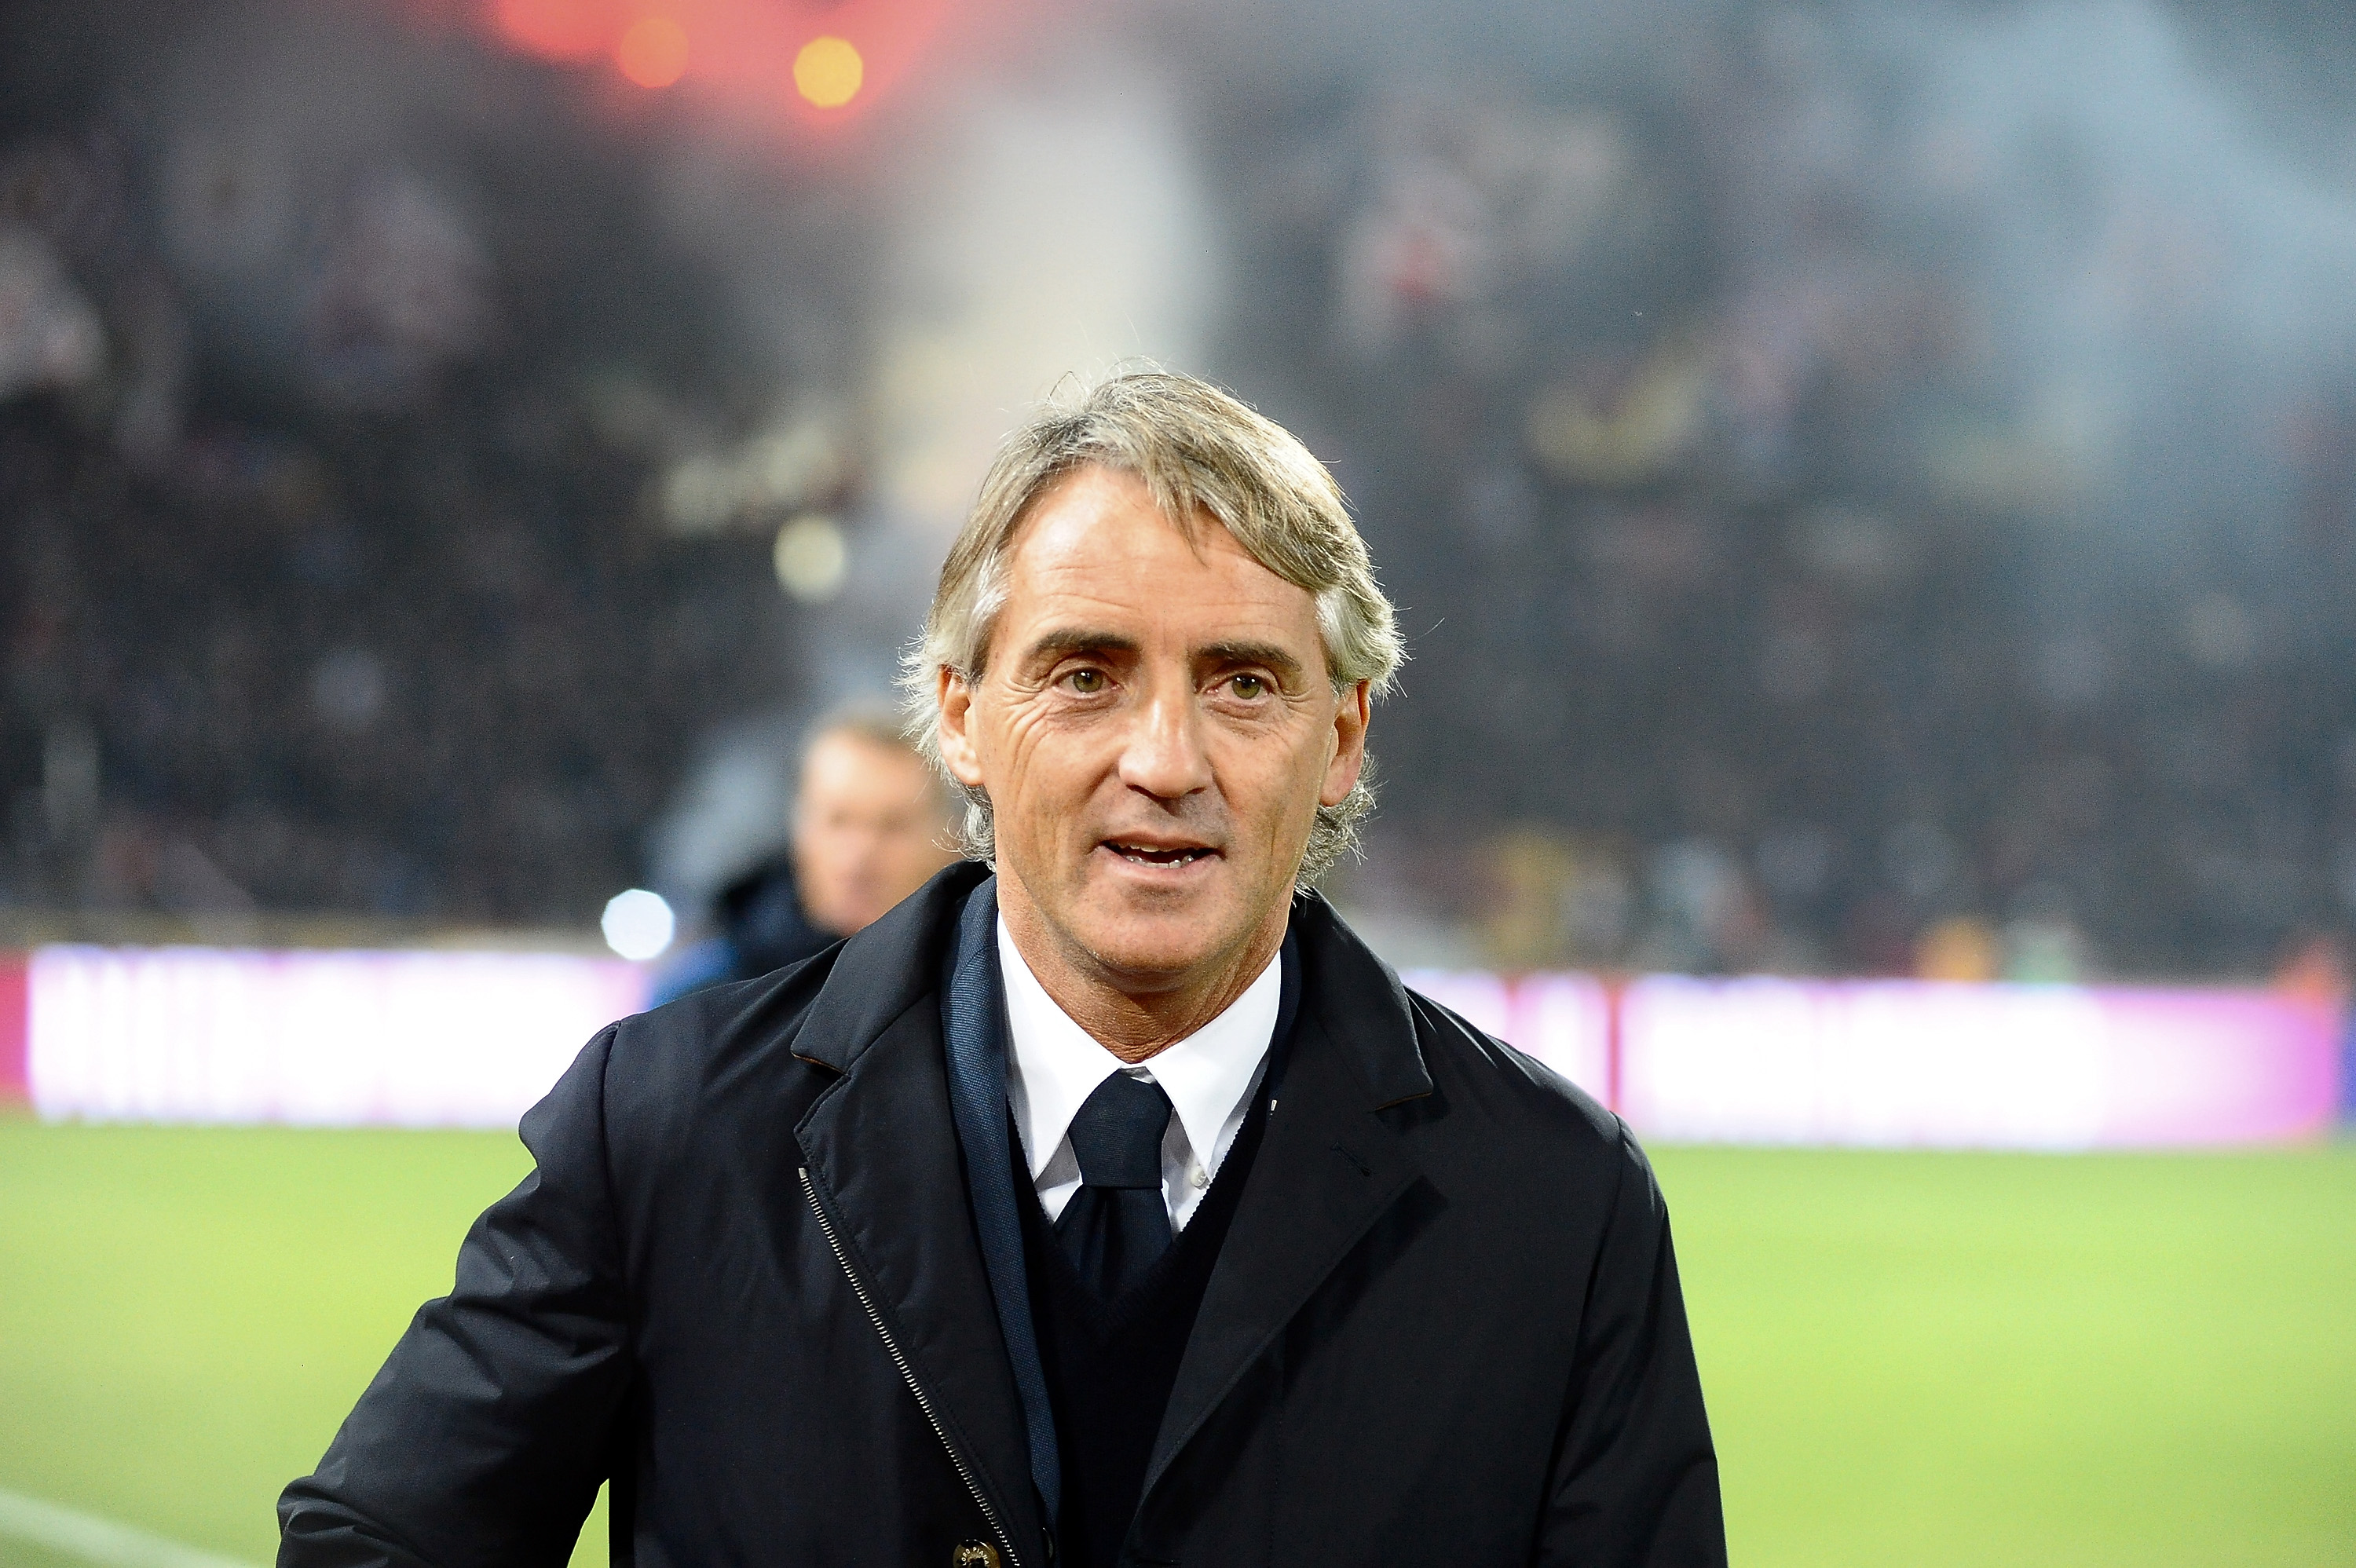 Mancini to IC: “It is a good result, now we must focus on Carpi”